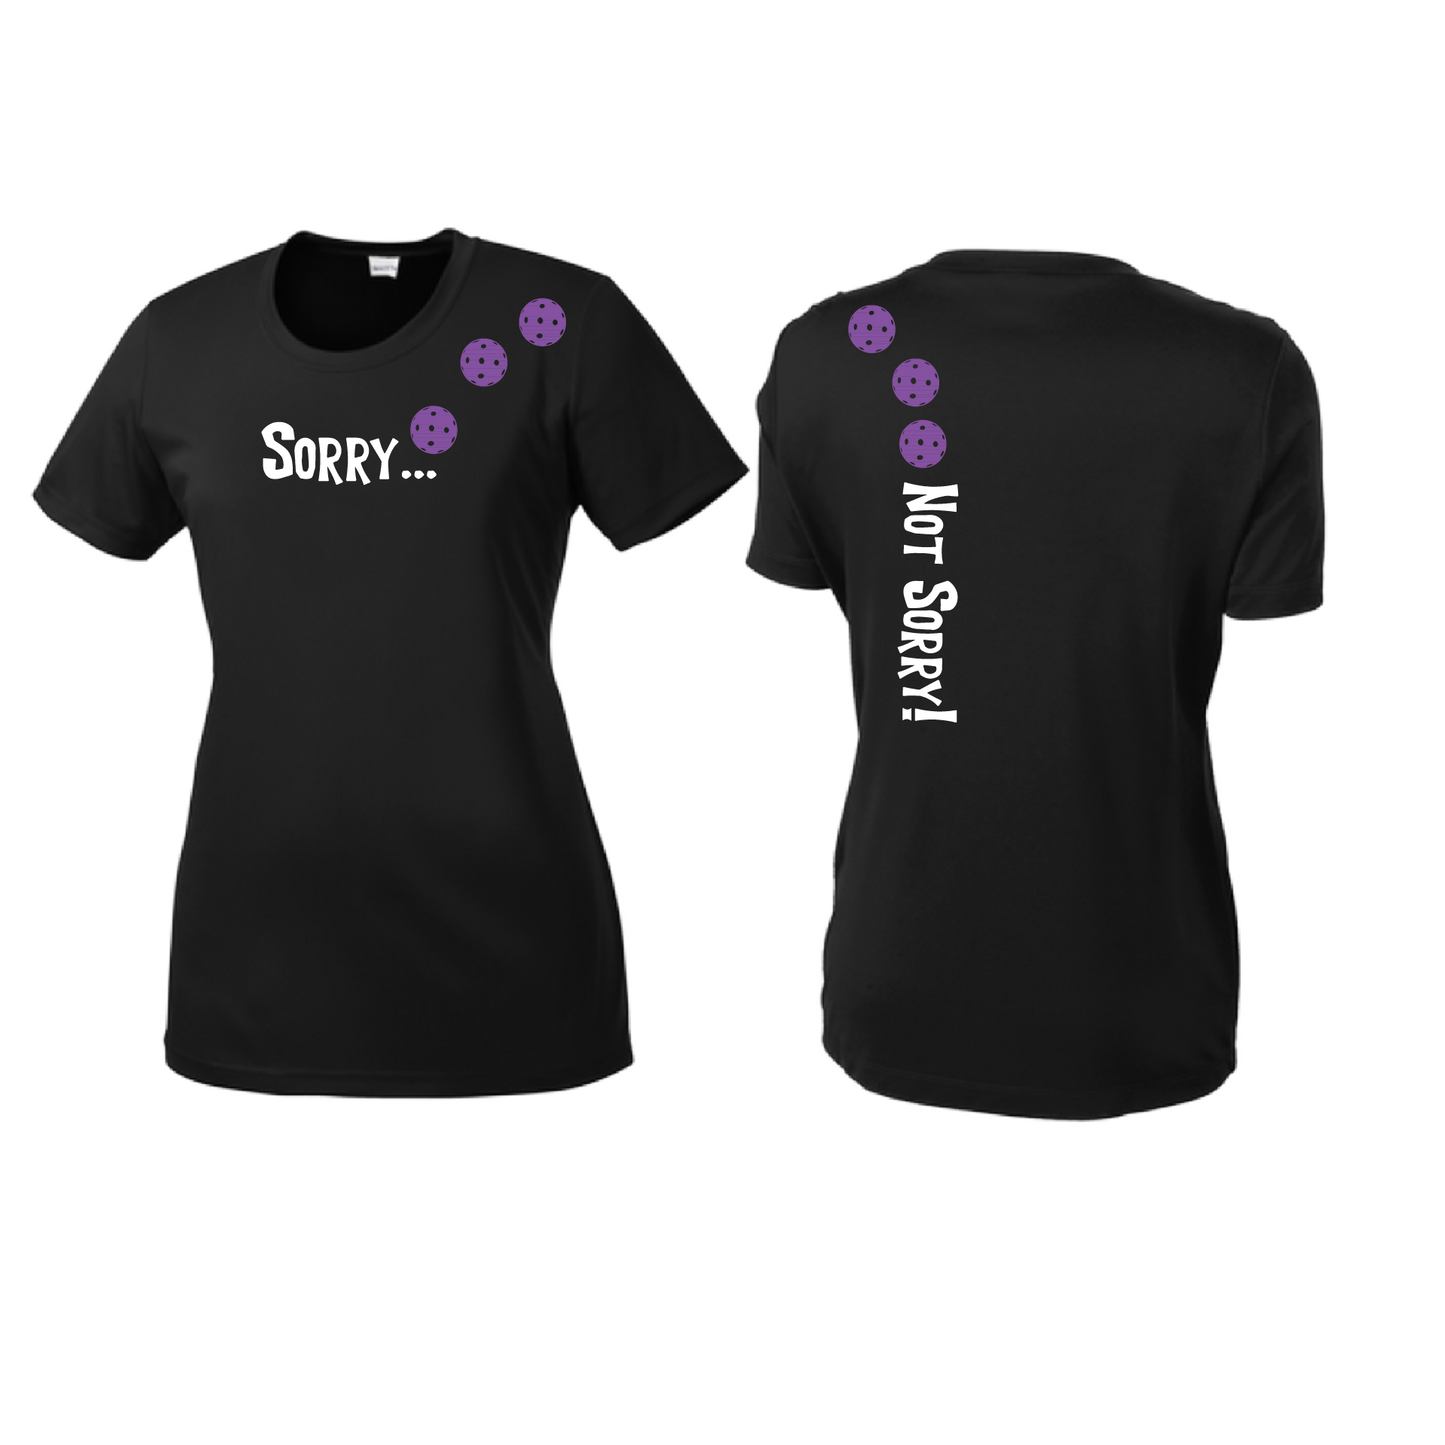 Pickleball Design: Sorry...Not Sorry with Customizable Ball Color - Choose: Orange, Green or Purple.   Women's Styles: Short-Sleeve Crew Neck Turn up the volume in this Women's shirt with its perfect mix of softness and attitude. Material is ultra-comfortable with moisture wicking properties and tri-blend softness. PosiCharge technology locks in color. Highly breathable and lightweight.